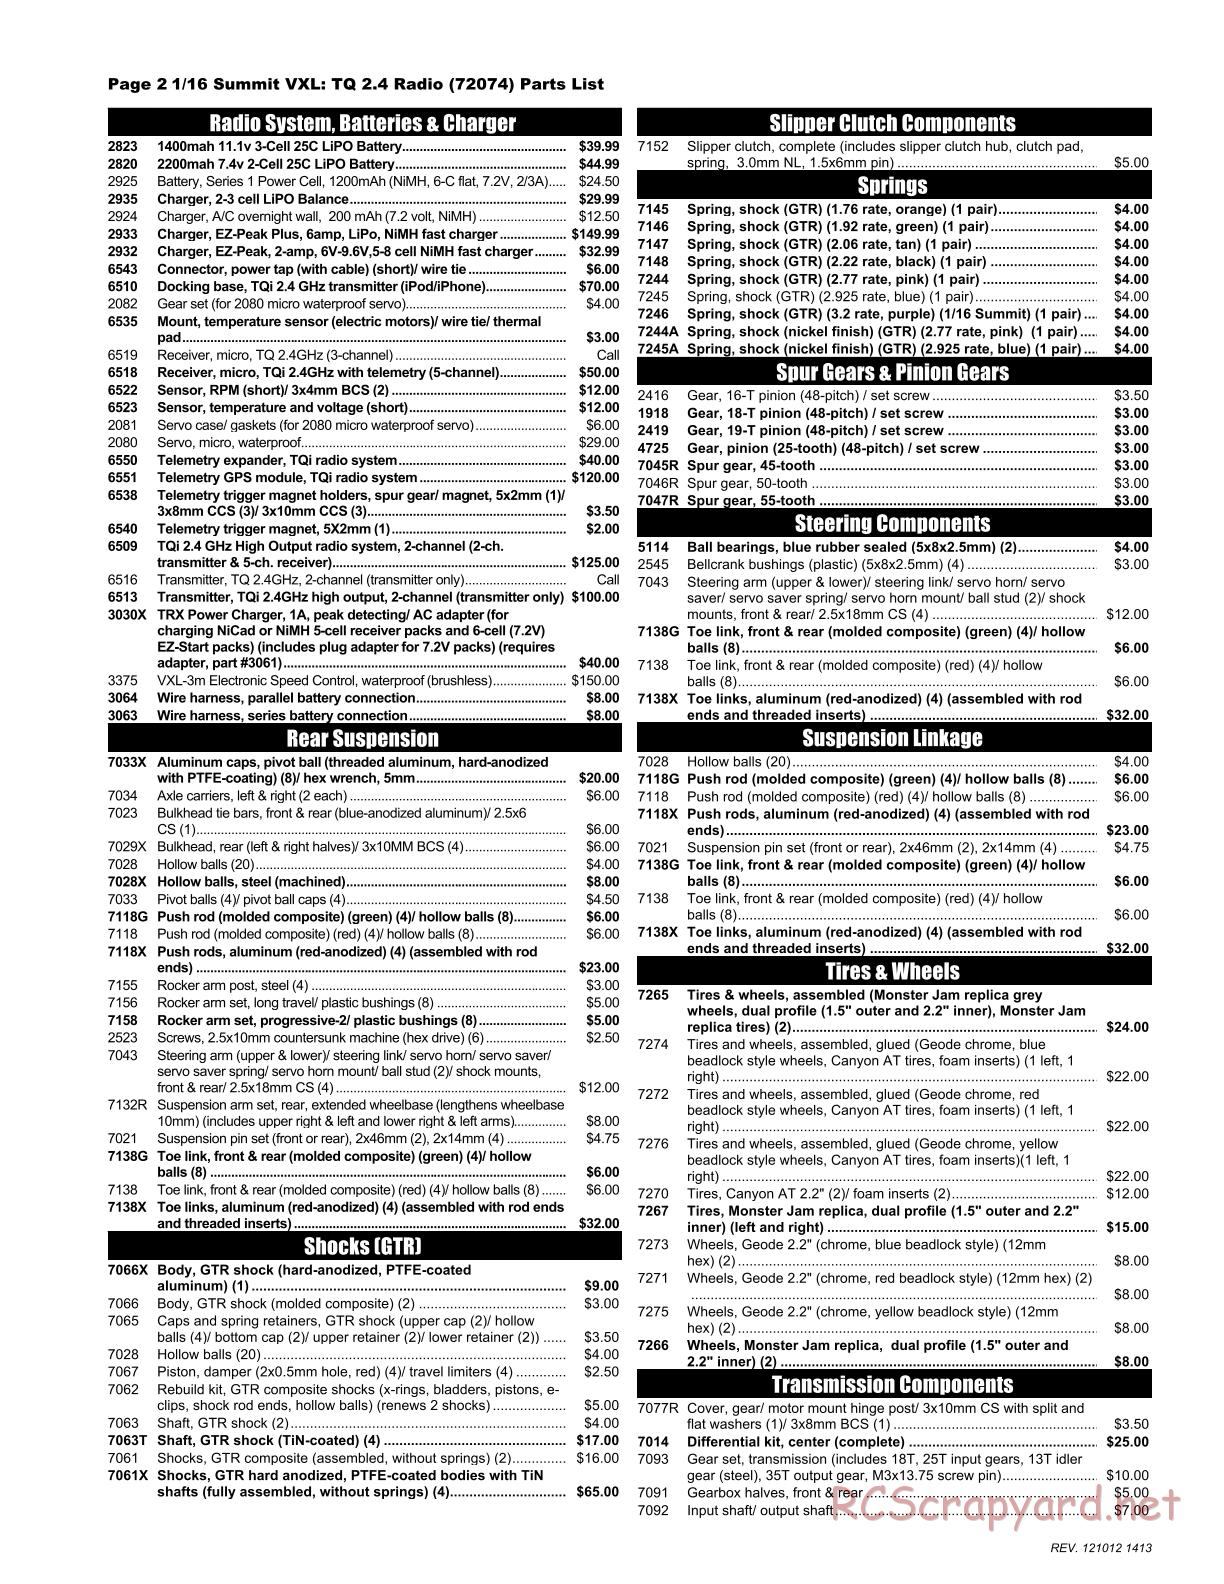 Traxxas - 1/16 Summit VXL (2012) - Parts List - Page 2